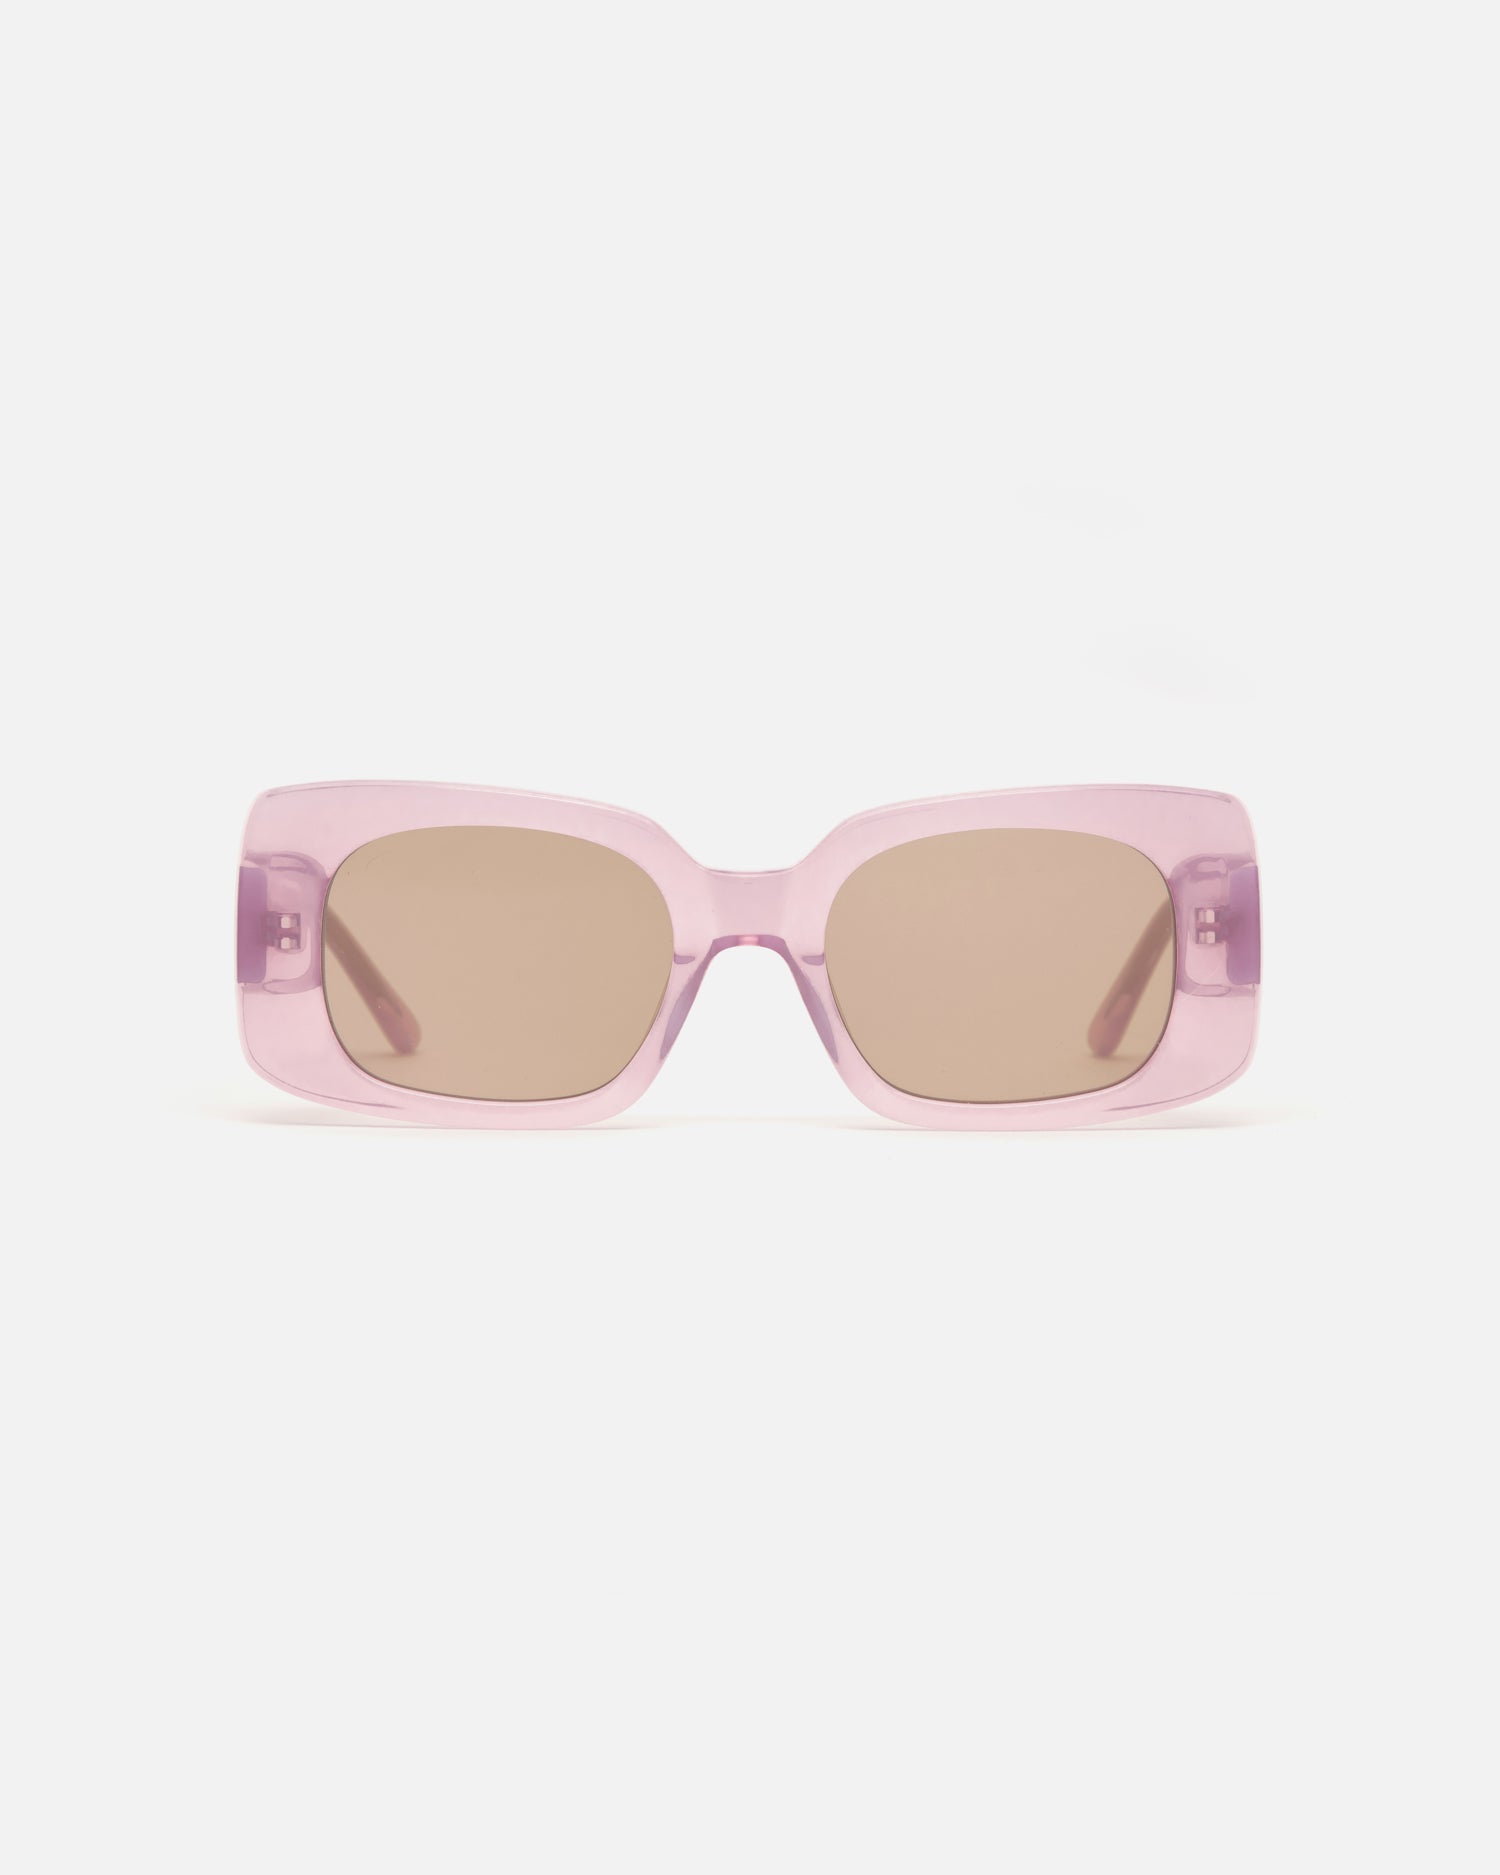 Lu Goldie Coco square Sunglasses in lilac purple acetate with tan brown lenses, front